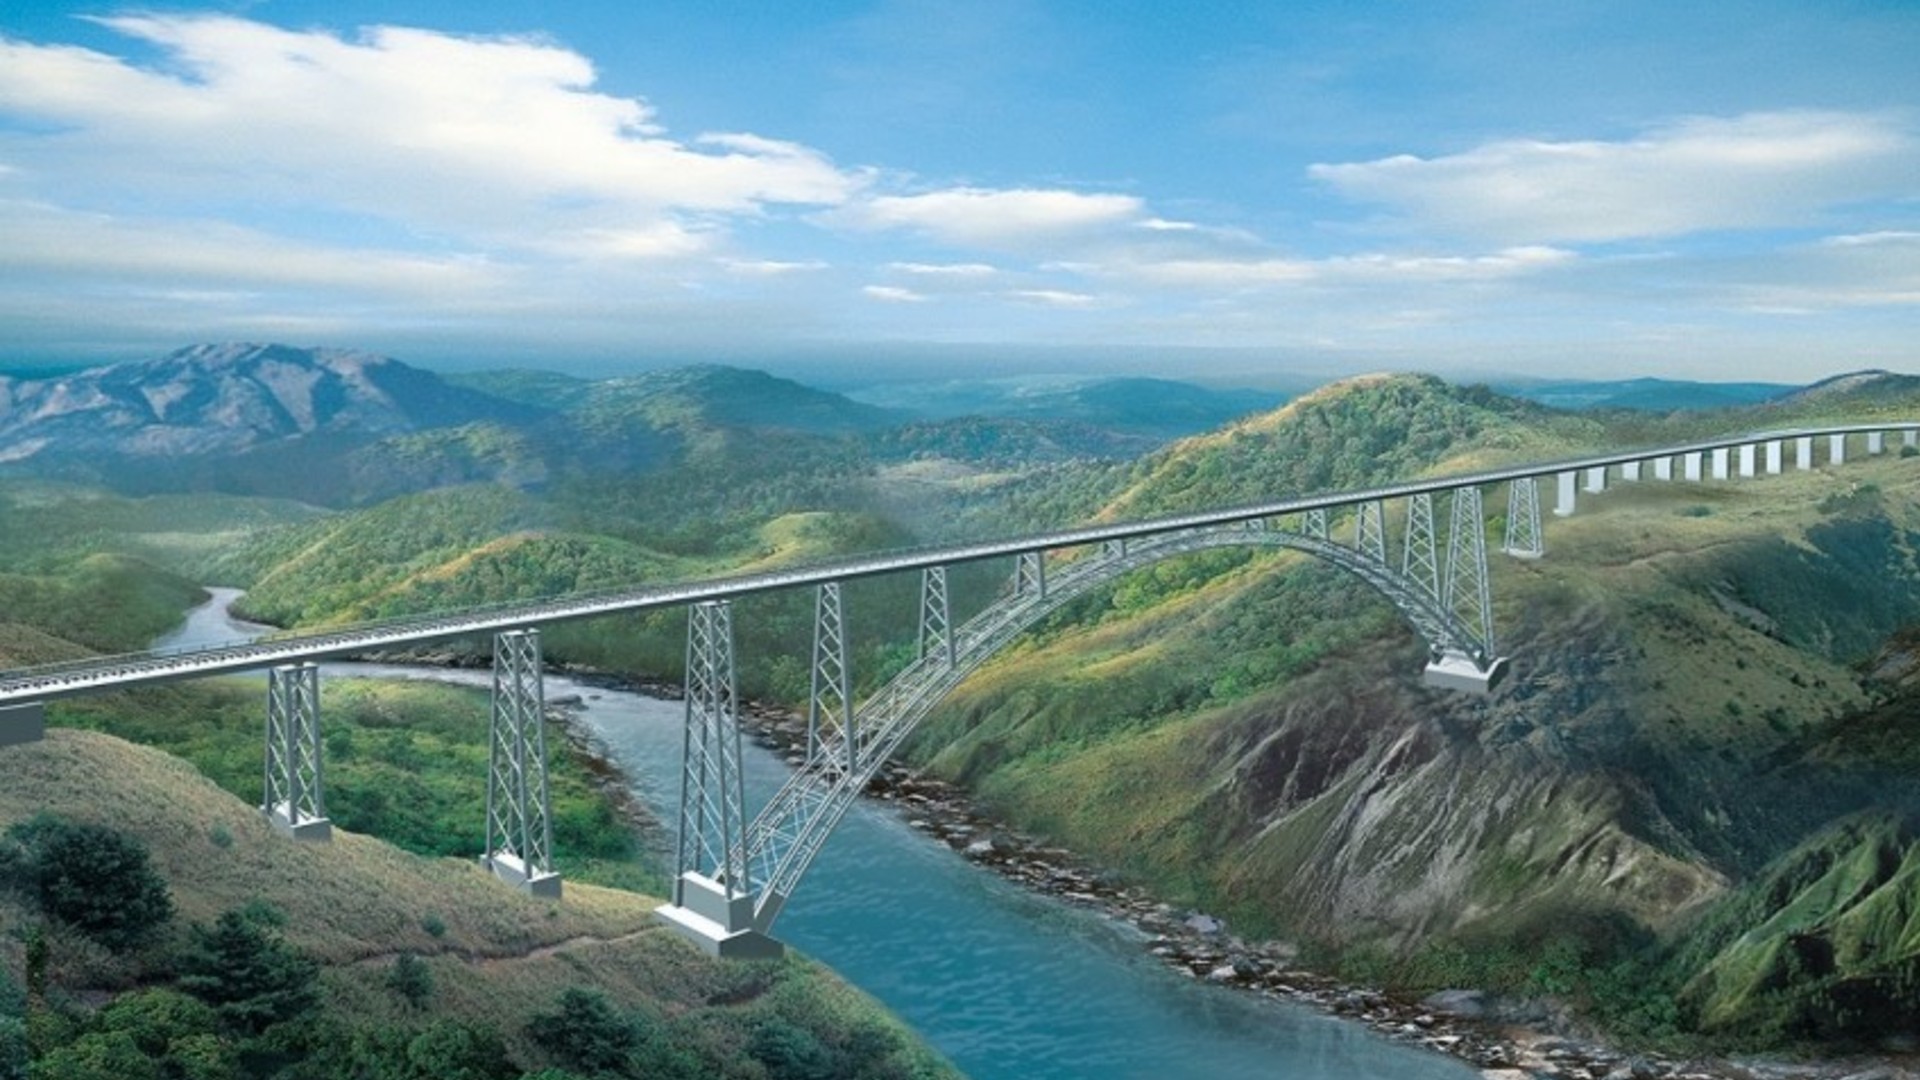 Anand Mahindra Wants To Visit World’s Highest Bridge In J&K